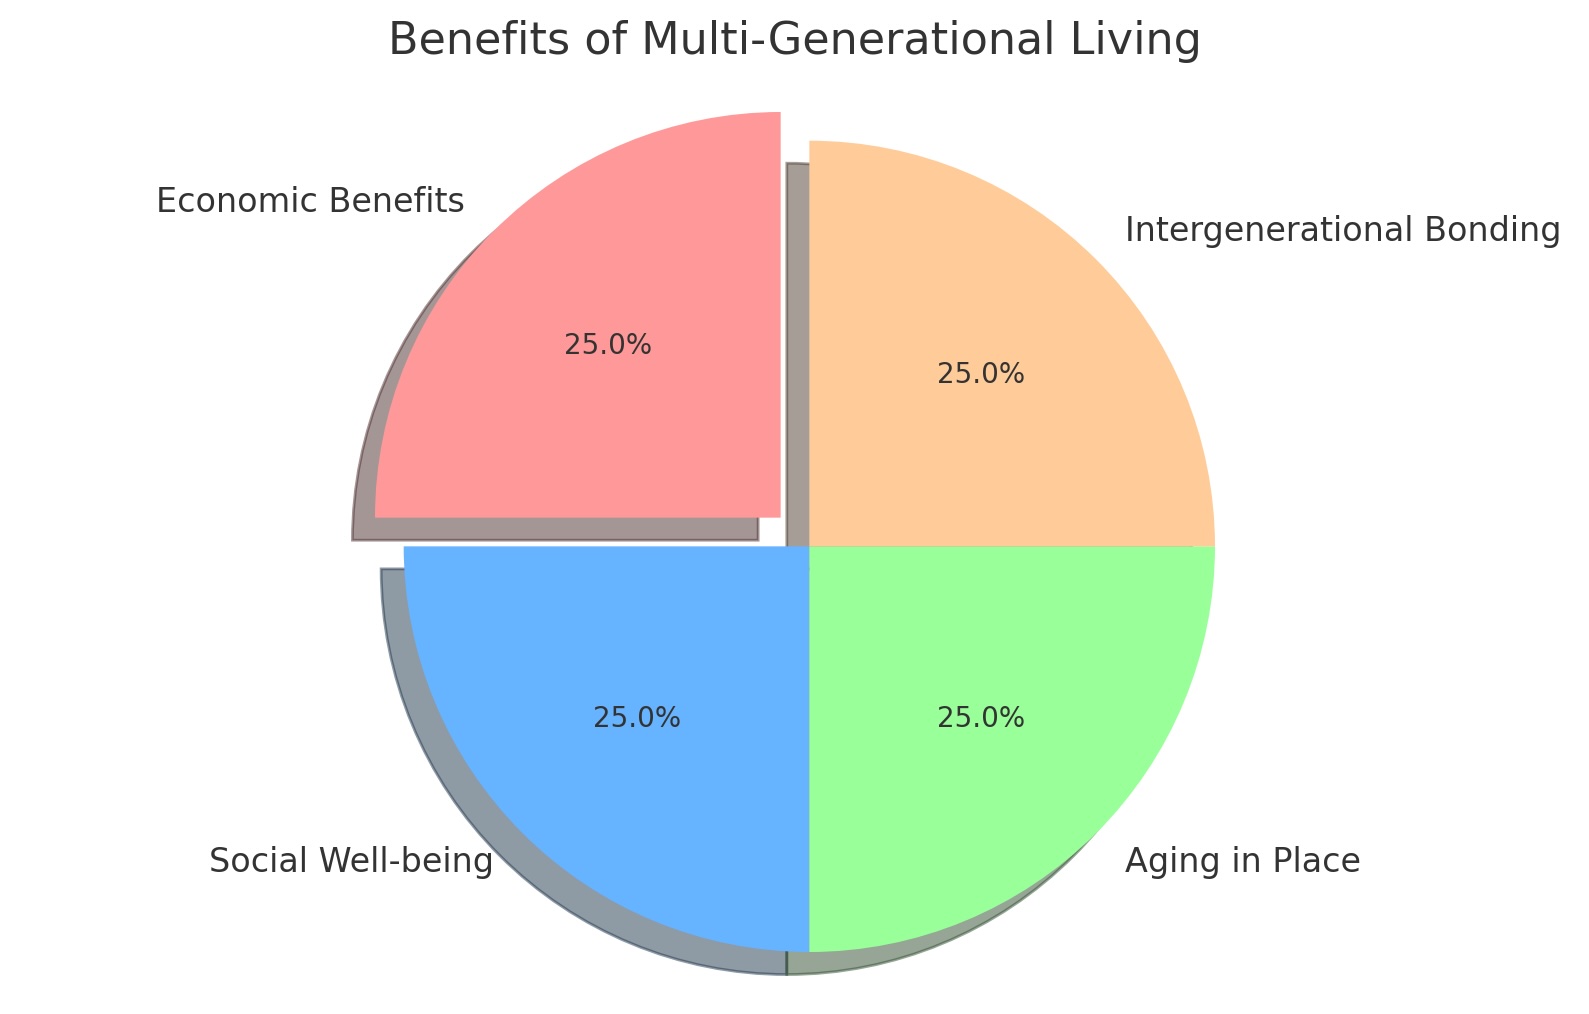 The image above visually represents the balanced benefits of multi-generational living, highlighting the equal importance of economic benefits, social well-being, aging in place, and intergenerational bonding. Each segment of the pie chart underscores a key advantage, illustrating how multi-generational living contributes to a holistic approach to family life and home ownership